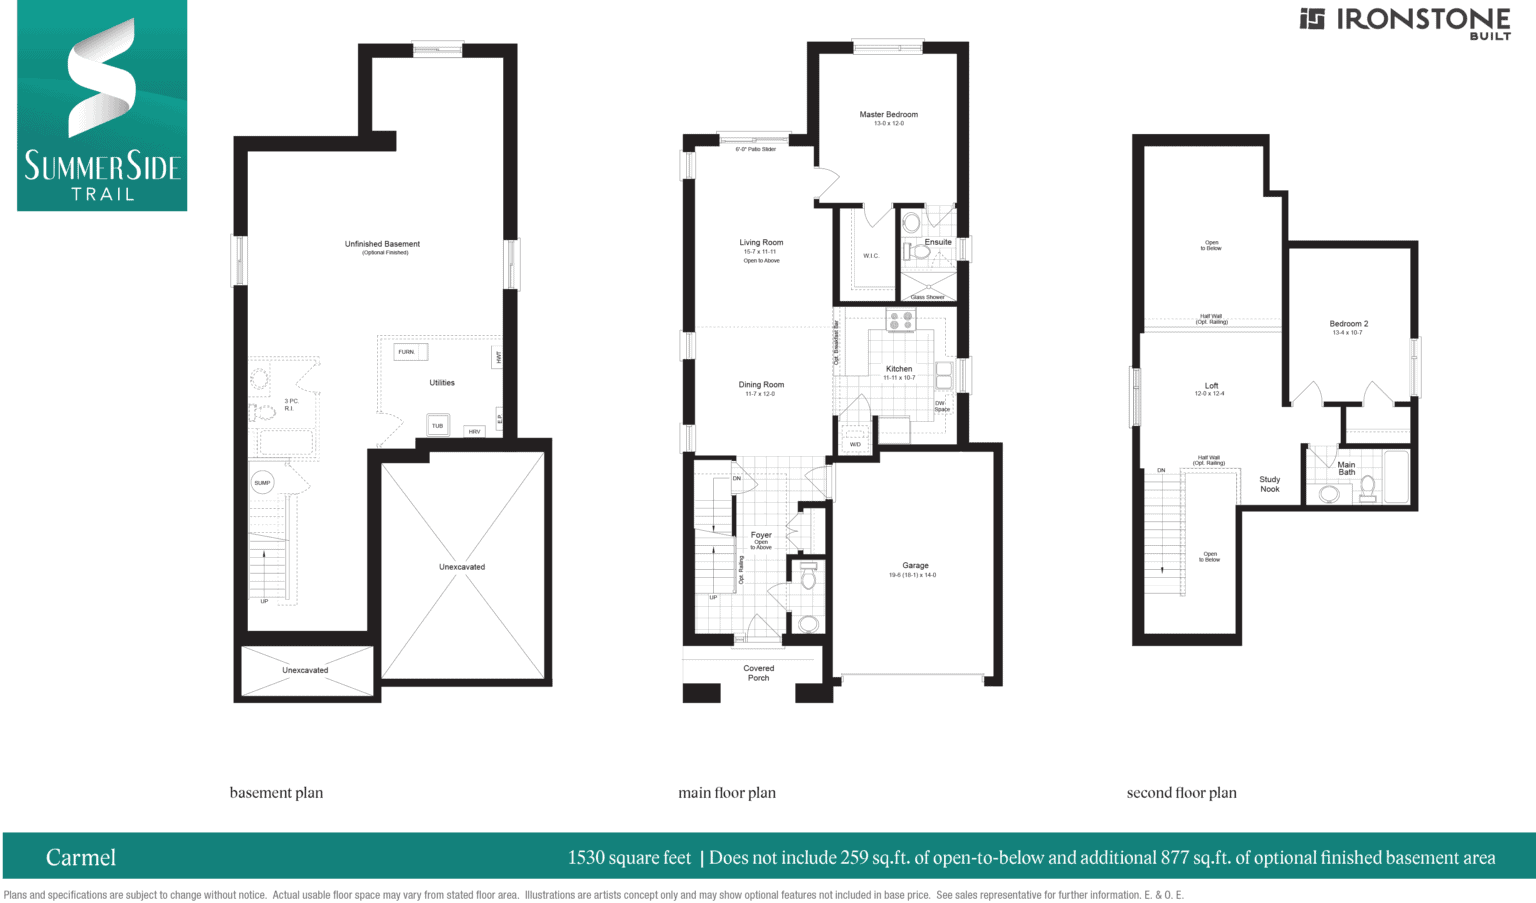  2100 Evans Blvd  Floor Plan of Summerside Trail with undefined beds